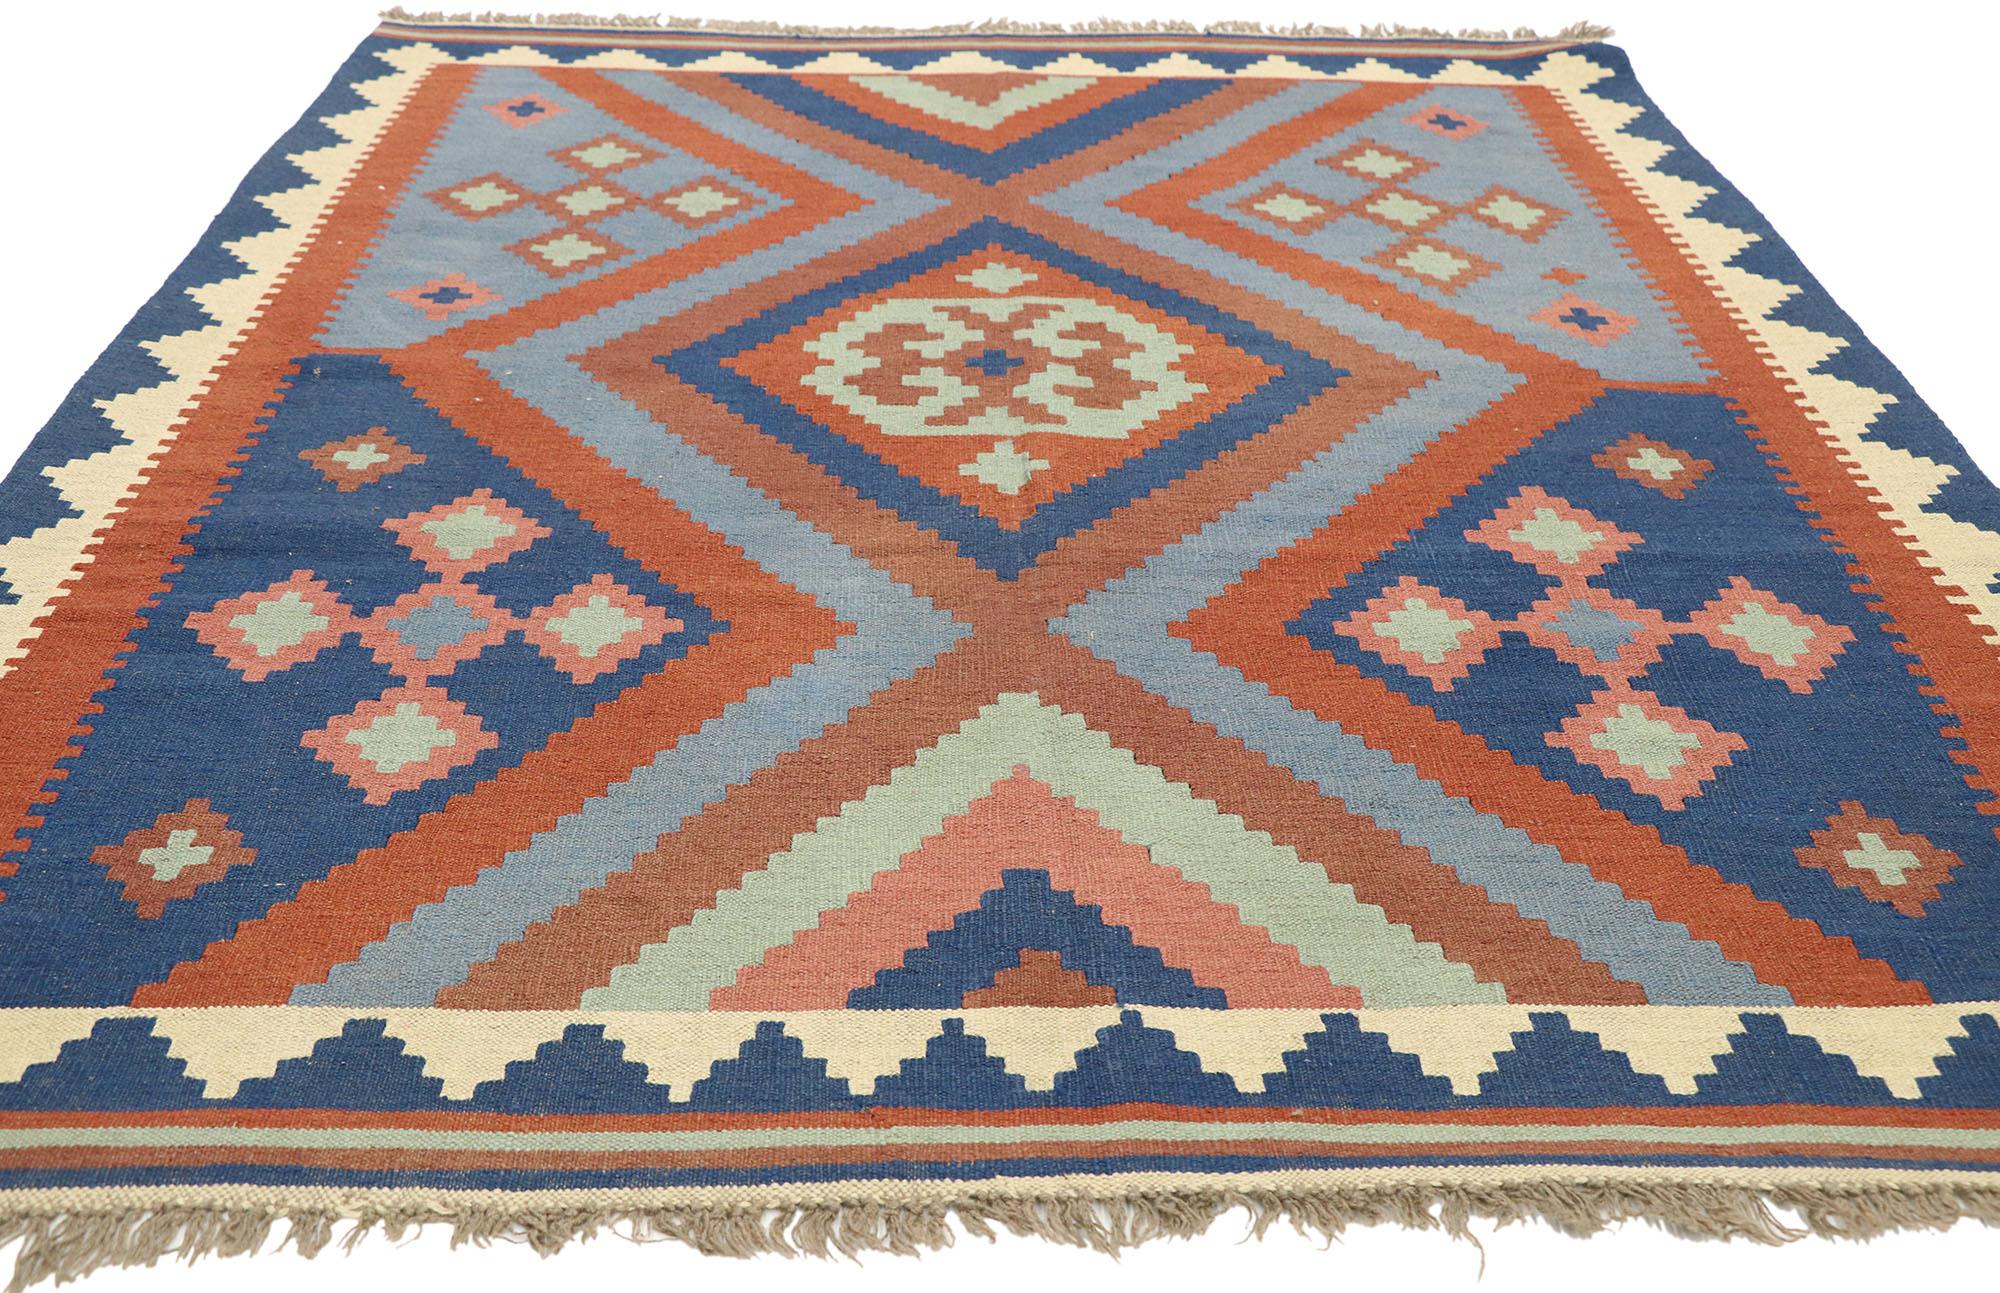 Hand-Woven Vintage Afghan Kilim Rug with Native American Navajo Two Grey Hills Style